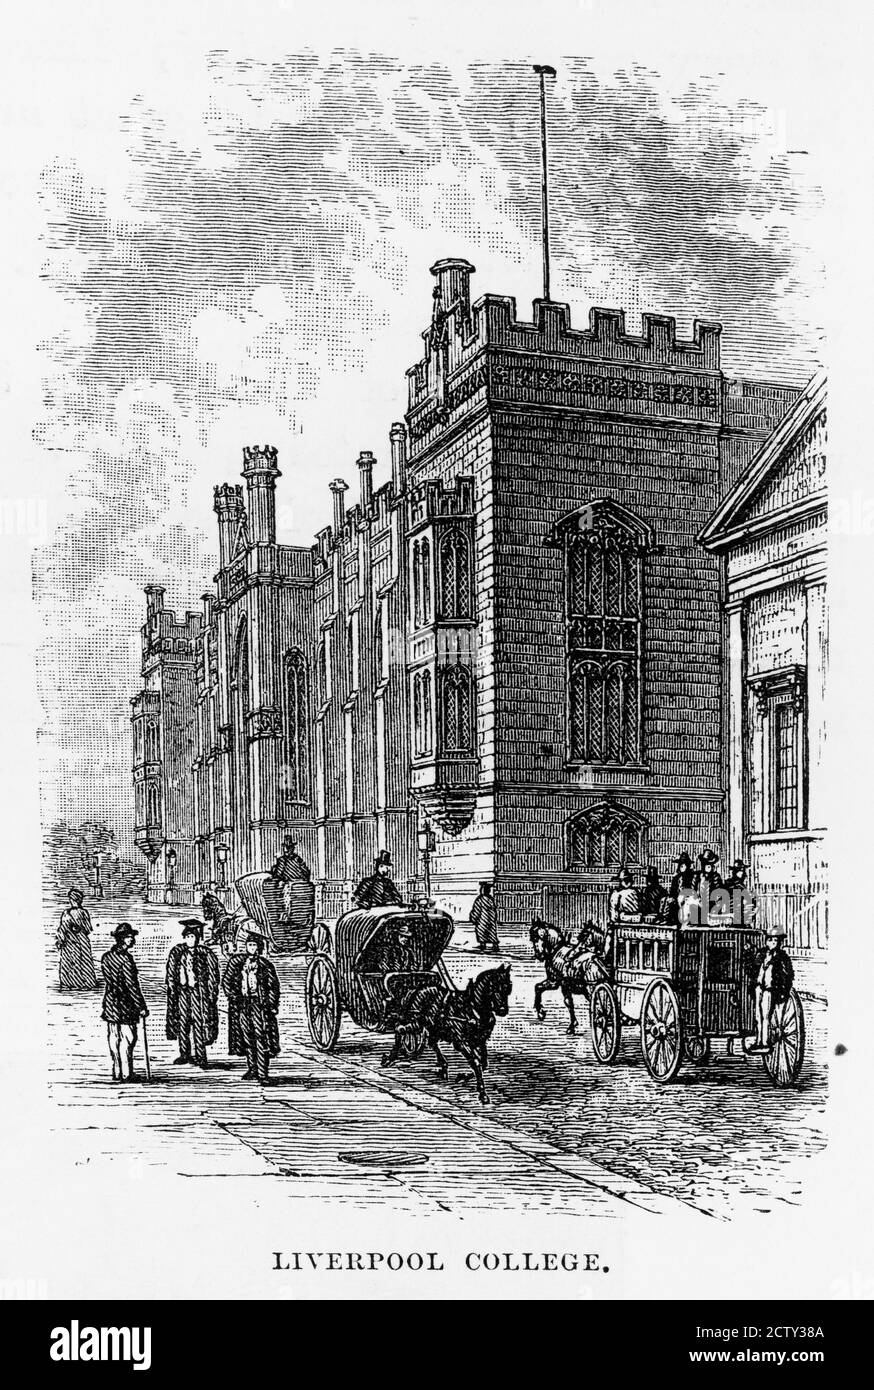 Liverpool College a Liverpool, Inghilterra Victorian Engraving, 1840 Foto Stock